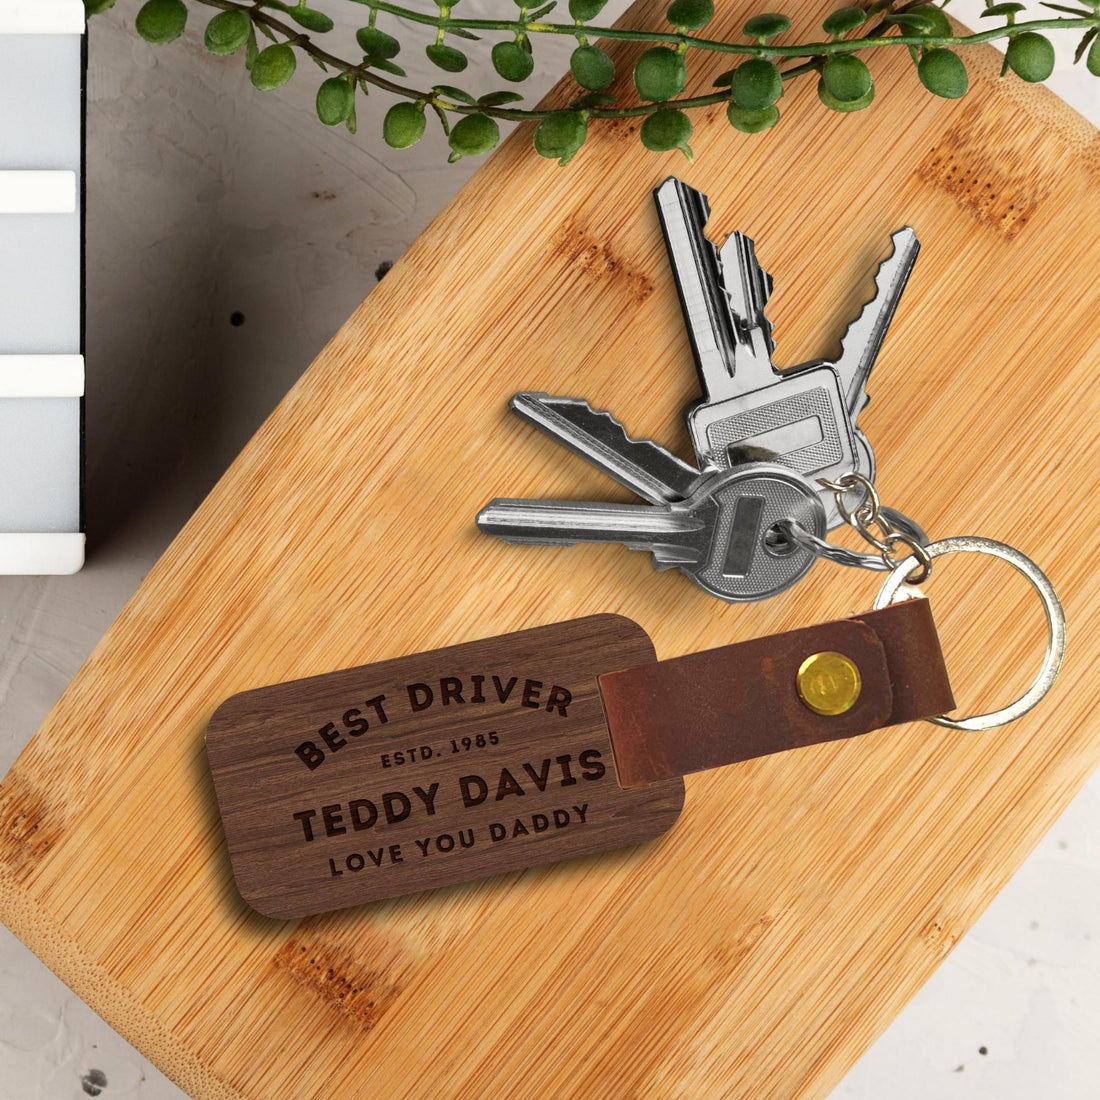 Personalised Wooden Keychain, Custom Wood Key Chain, Logo Engraved Leather Key Ring Tags, Drive Safe Keyrings Gift For Him, Dad/ Corporate, Wedding Favours